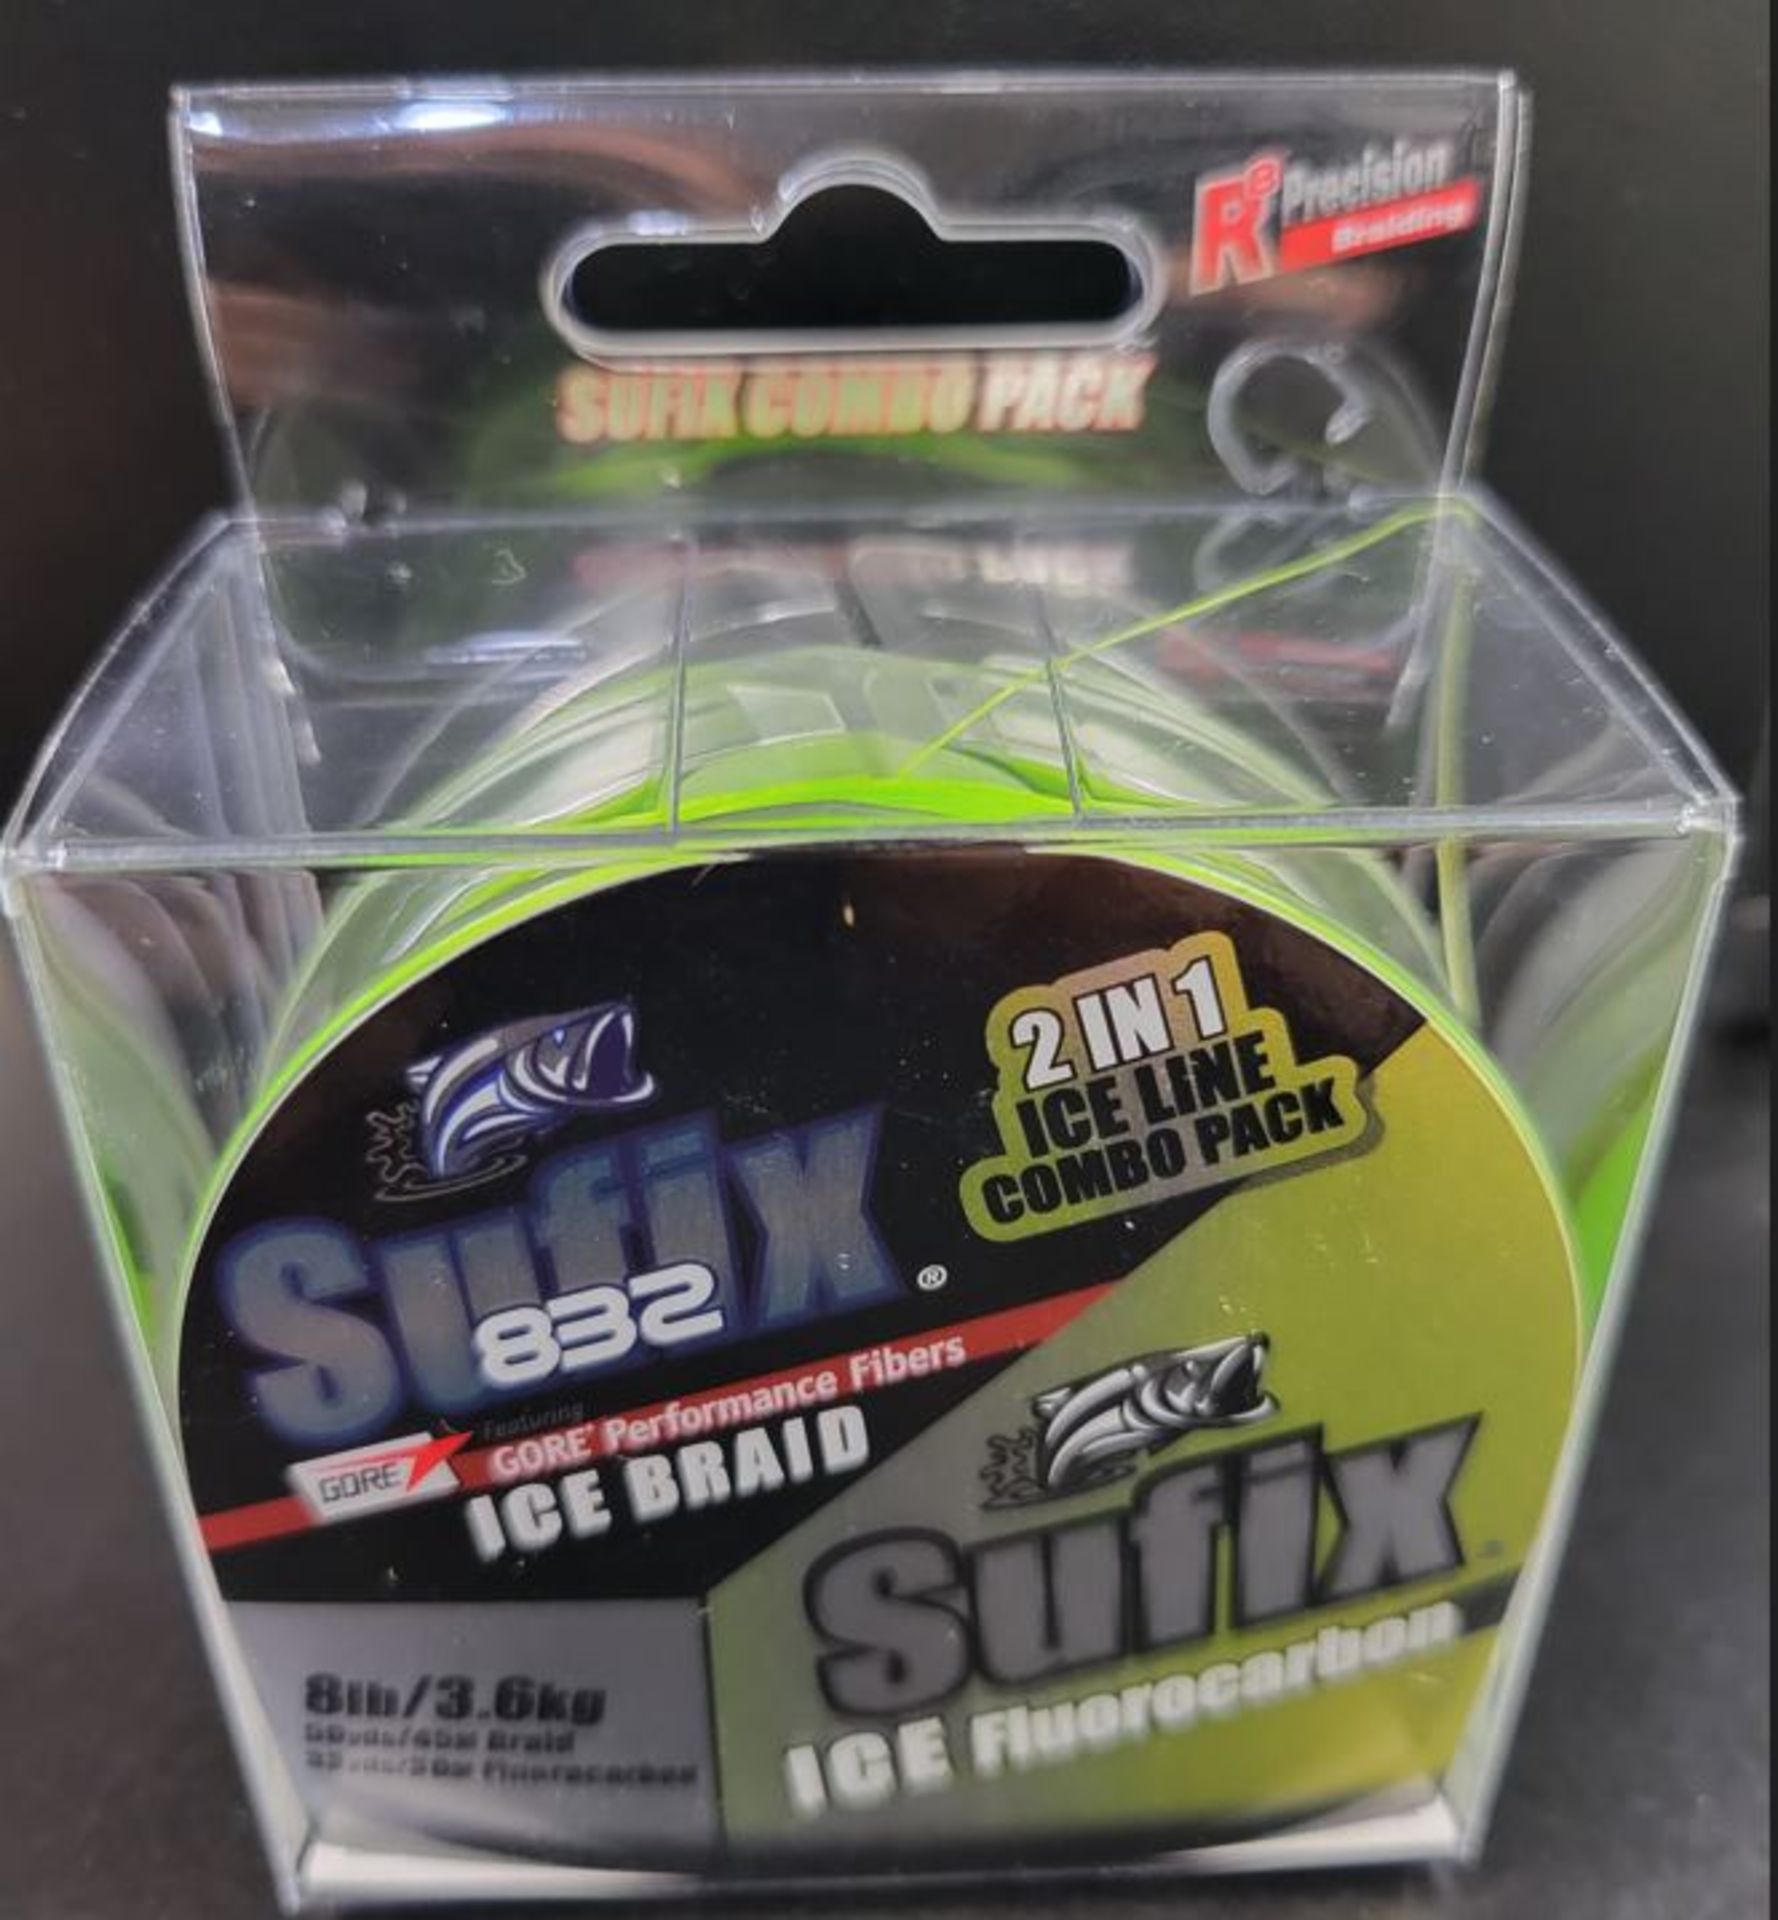 Sufix 832 - 2 in 1 Ice Line Combo Pack 8lbs - 50 yds Braid / 33 yds Fluorocarbon - MSRP $19.99